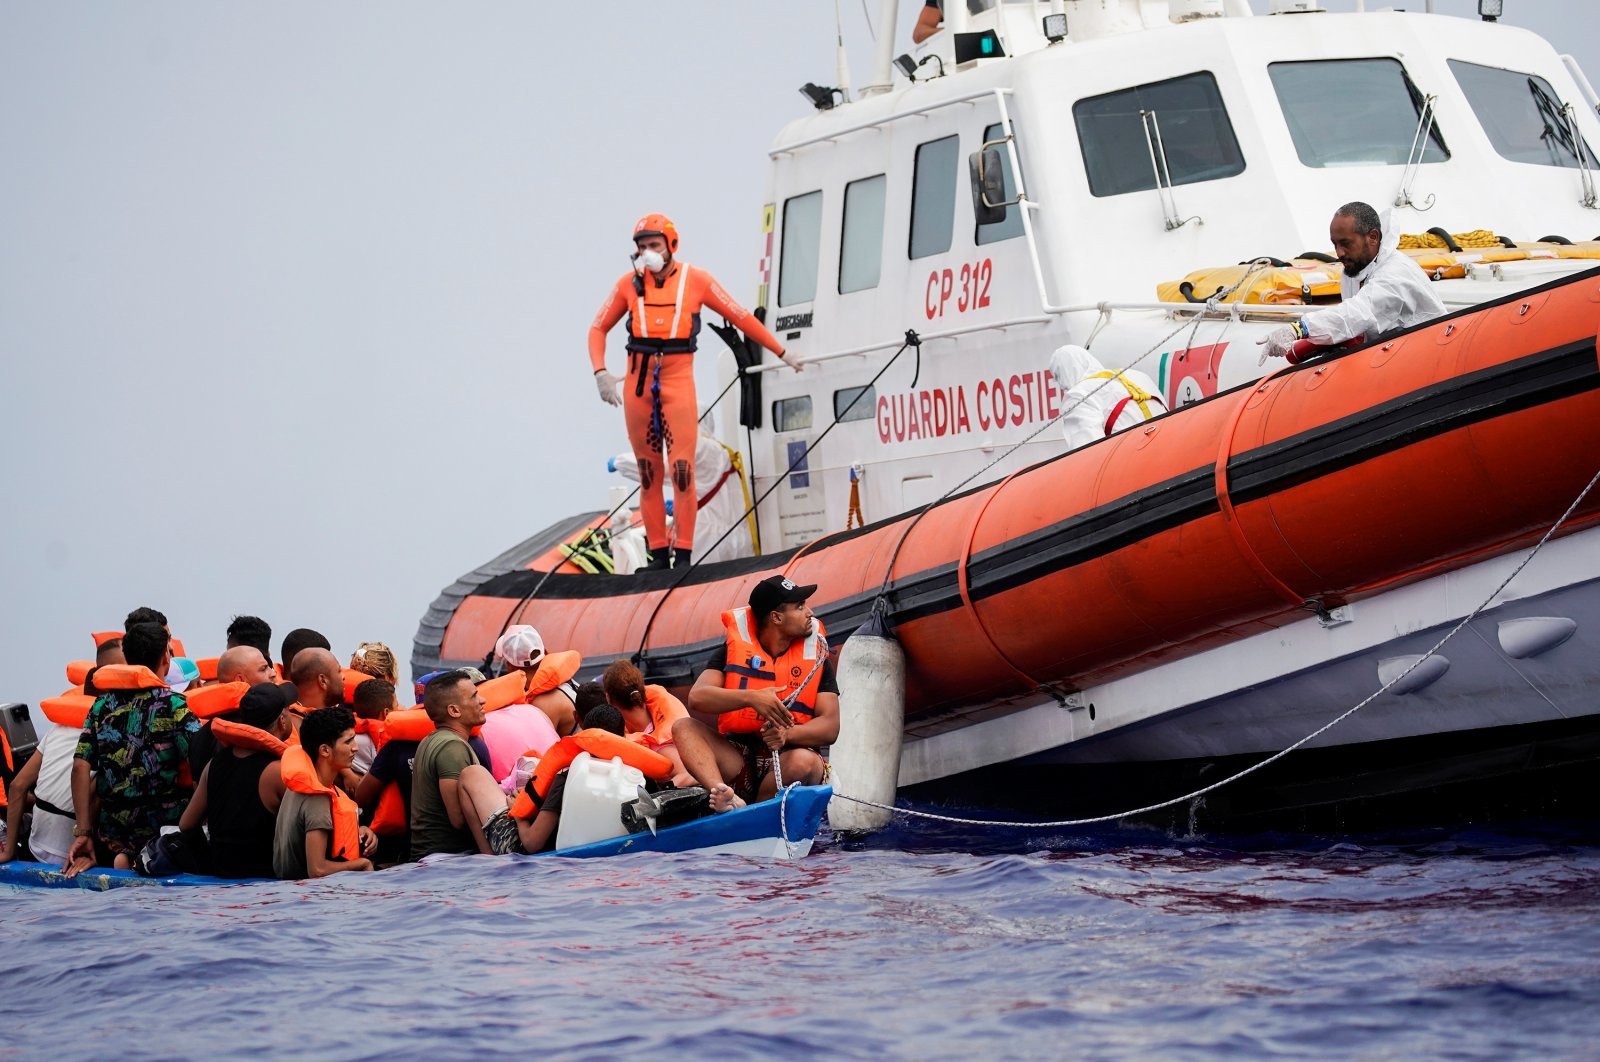 Members of Italy's Guardia Costiera prepare to bring on board migrants off a wooden boat near the Italian island of Lampedusa, in the Mediterranean Sea, Sept. 1, 2021. (Reuters Photo)